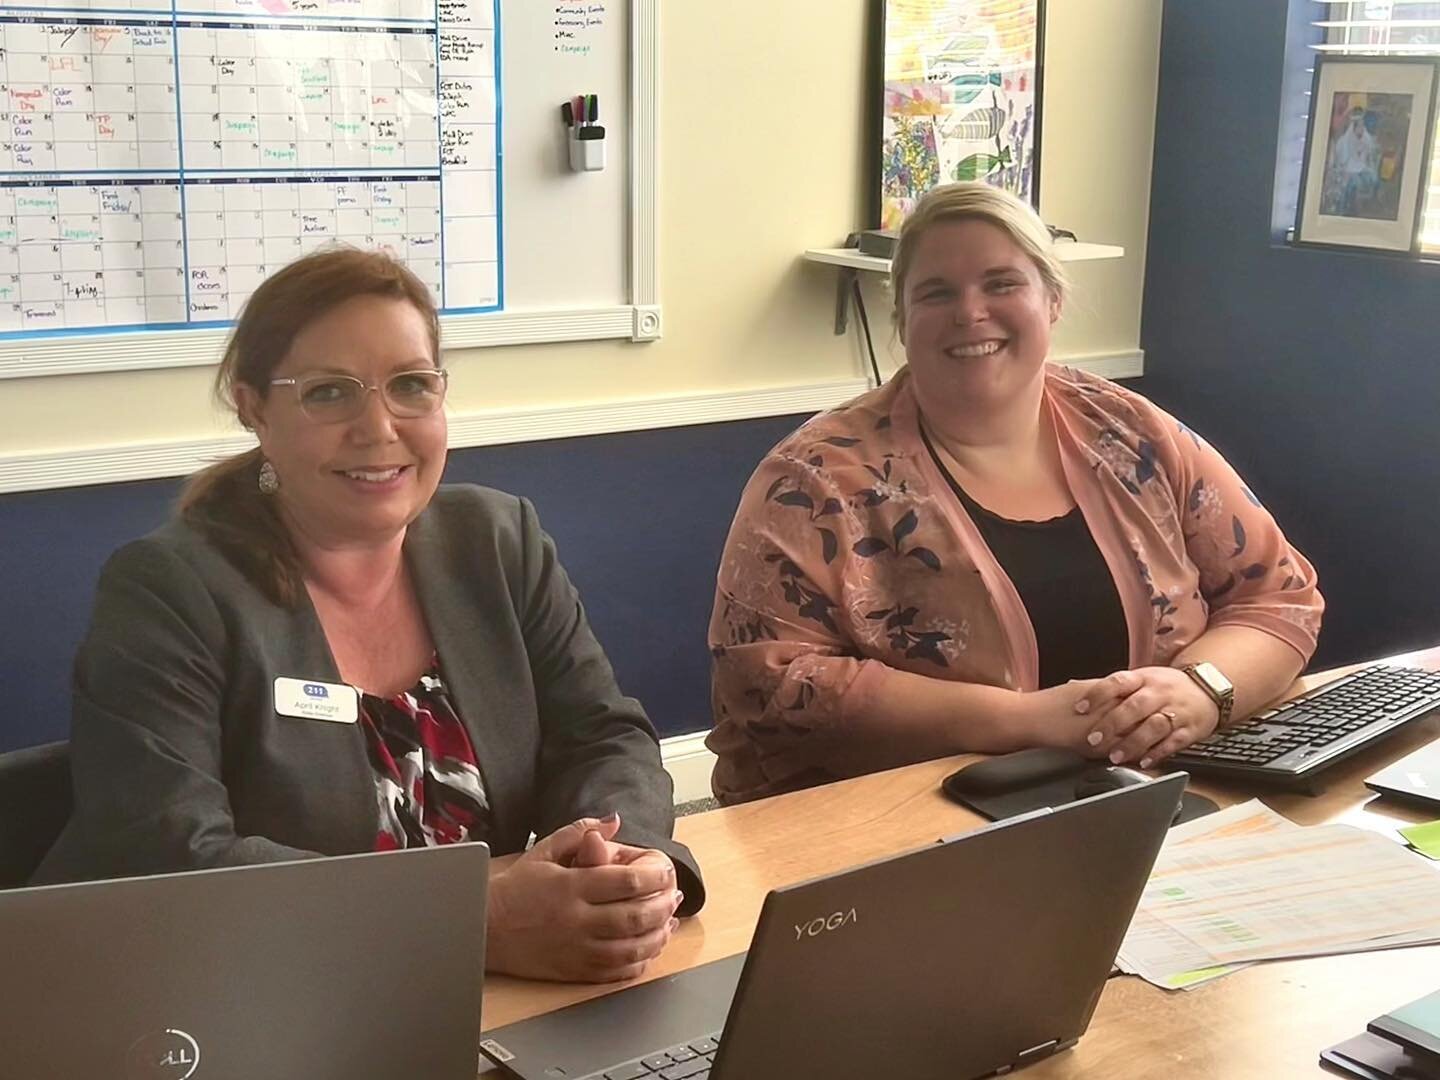 We are so excited to have April Knight, the State Director for West Virginia 211, spending a couple of days with us this week! 😃

April is working with our Community Engagement Specialist, Delaney, to continue our efforts to build a strong 211 syste